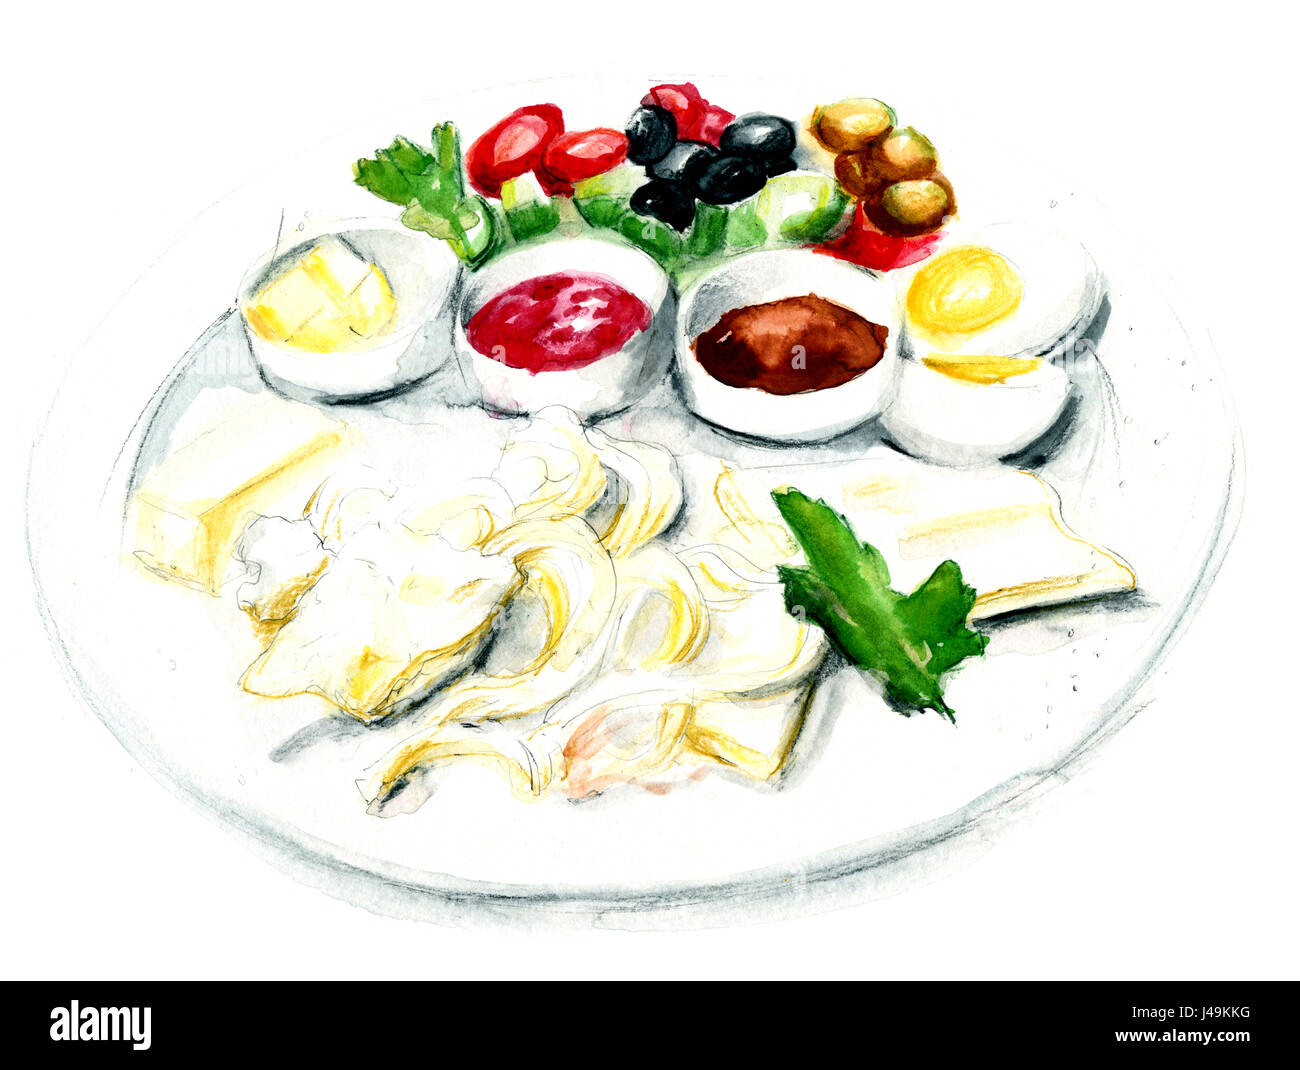 A Turkish breakfast salad, hand painted in watercolor and isolated on a white background. Stock Photo